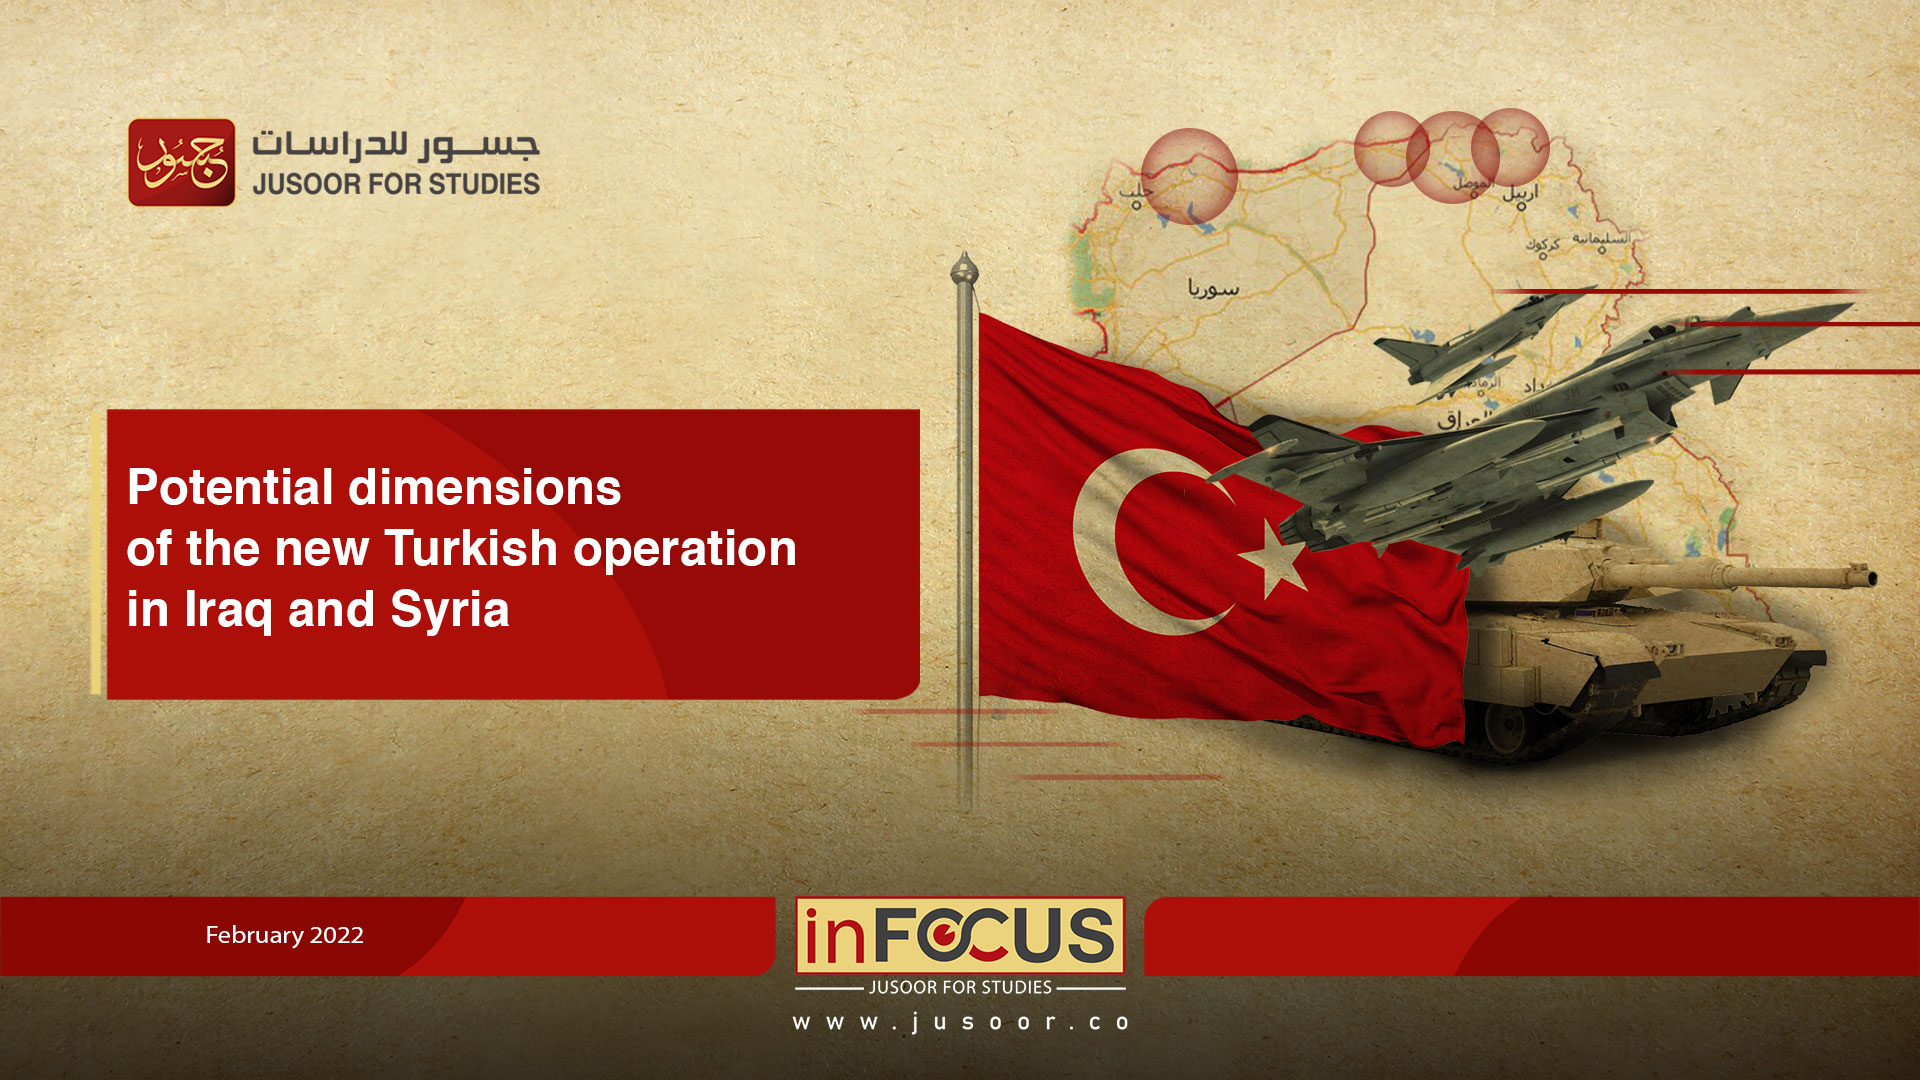 Potential dimensions of the new Turkish operation in Iraq and Syria